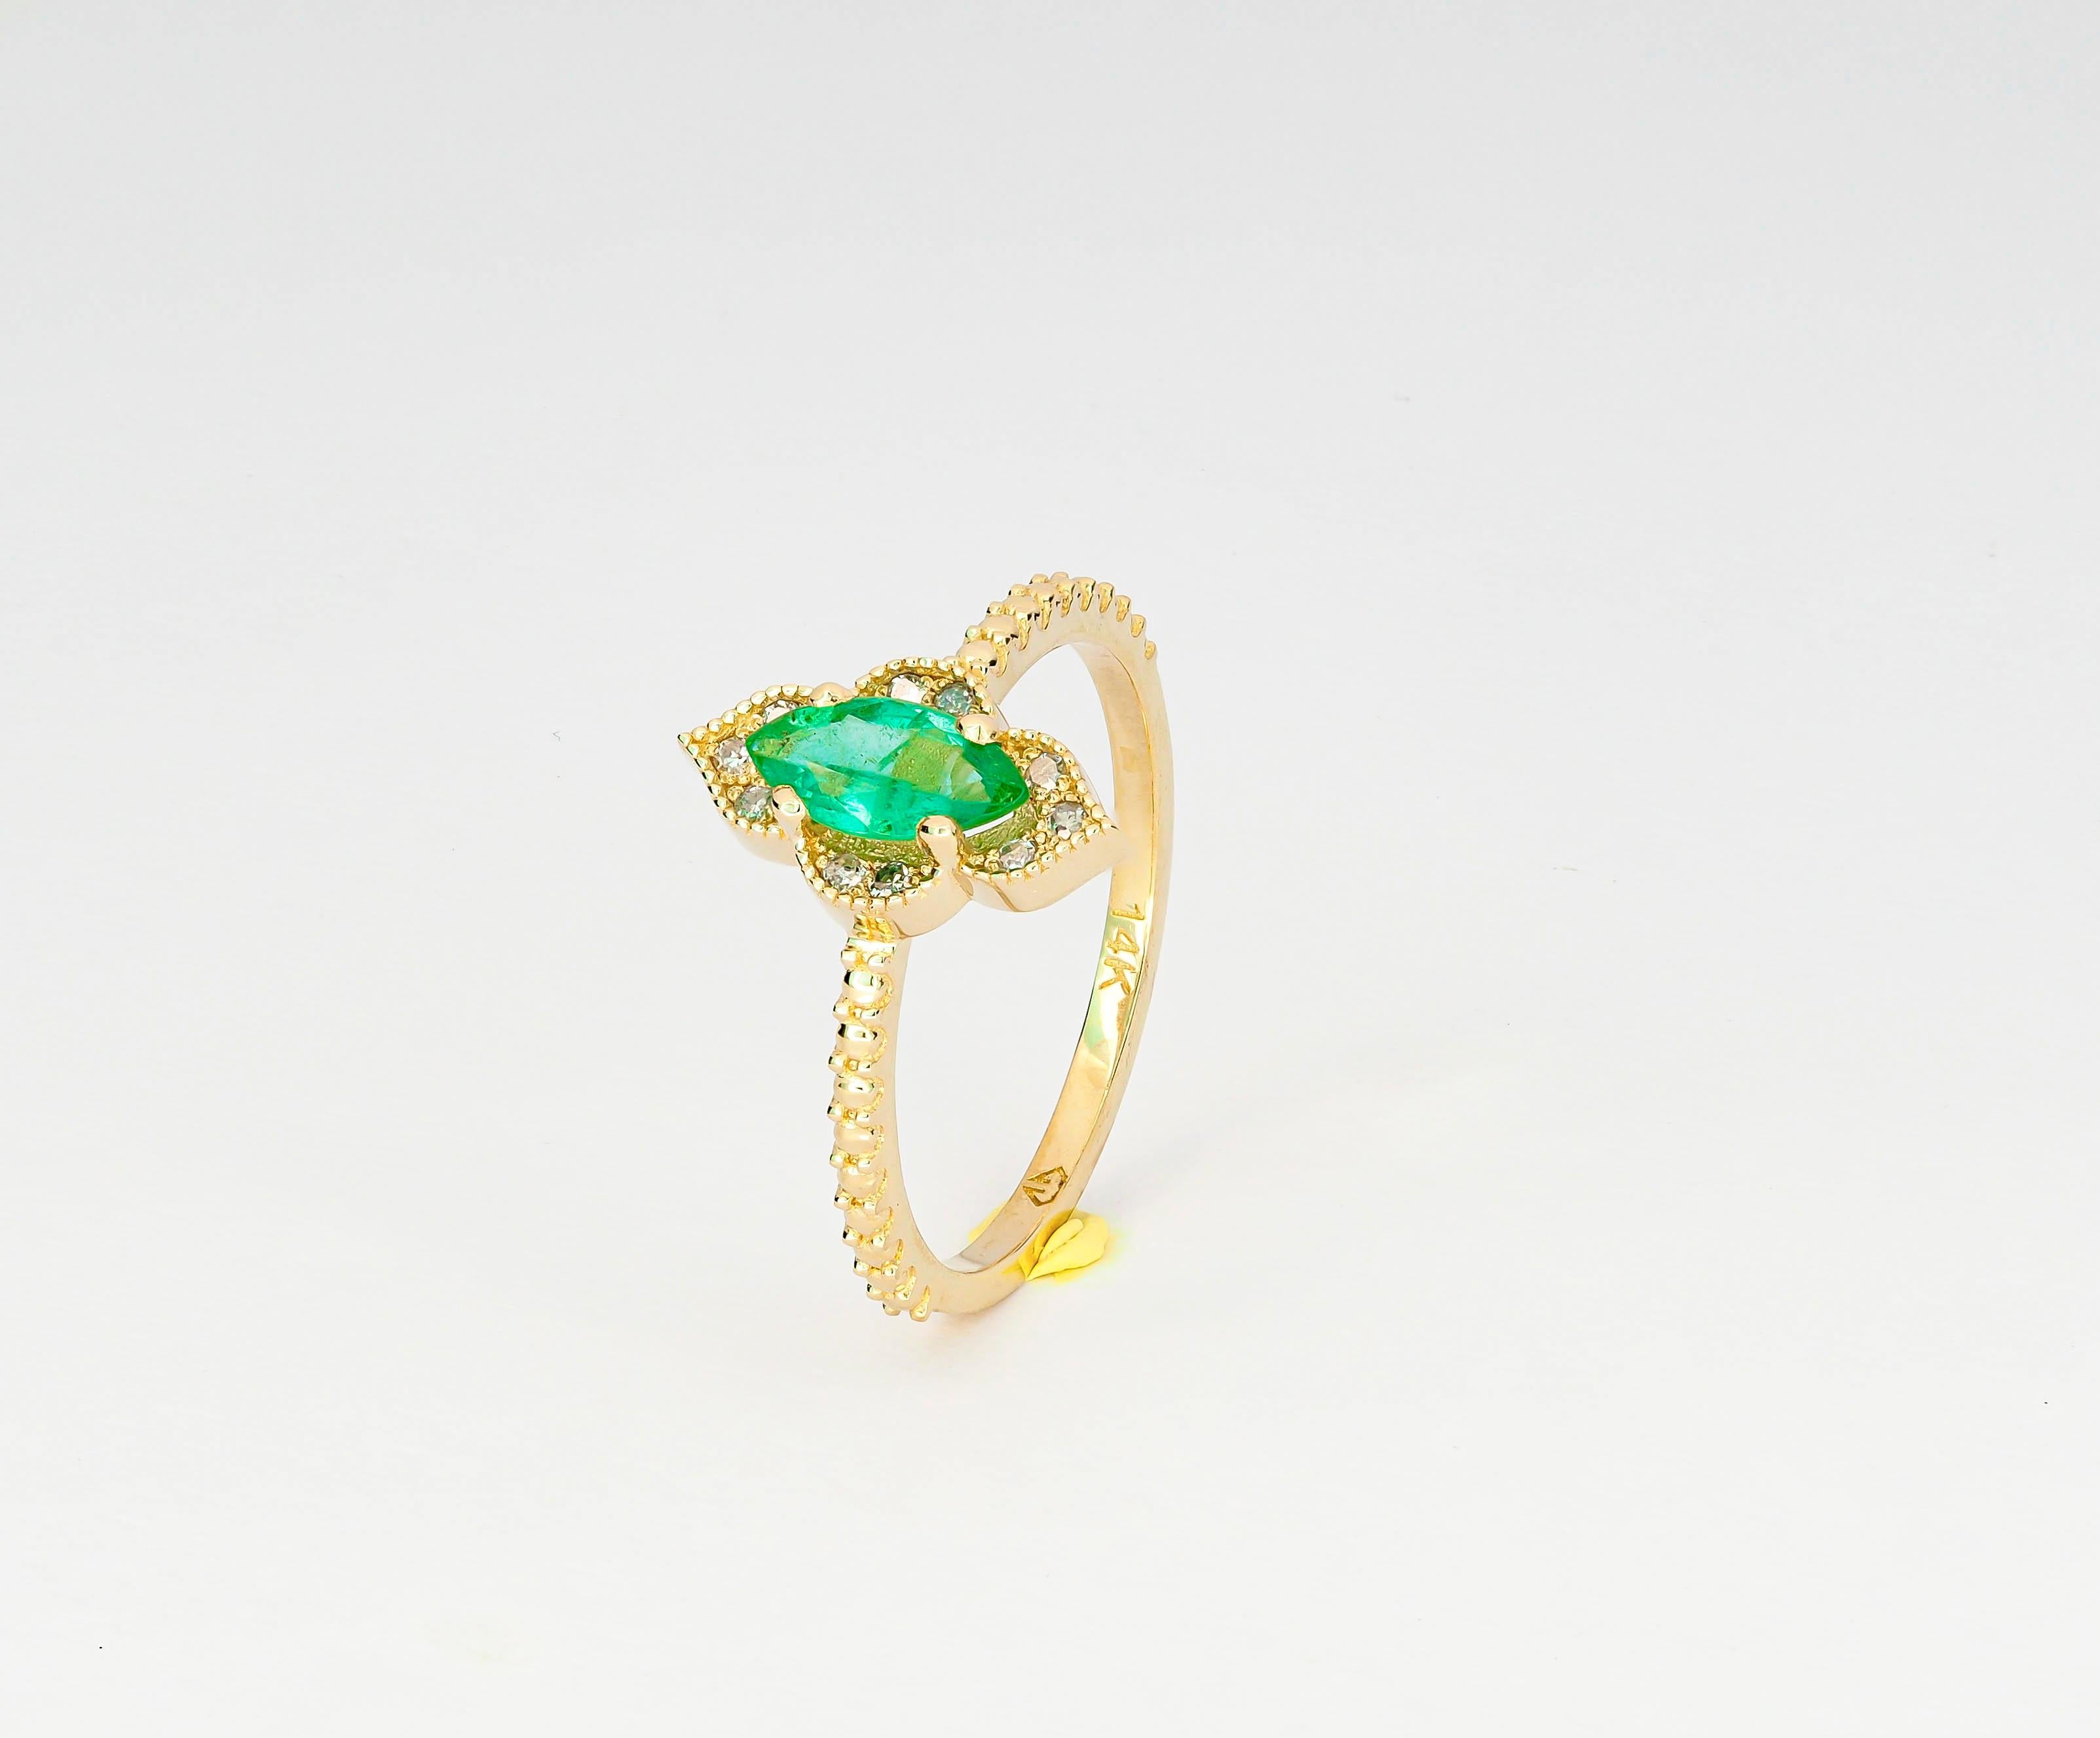 Modern 14 Karat Solid Gold Ring with Natural Emerald and Diamonds